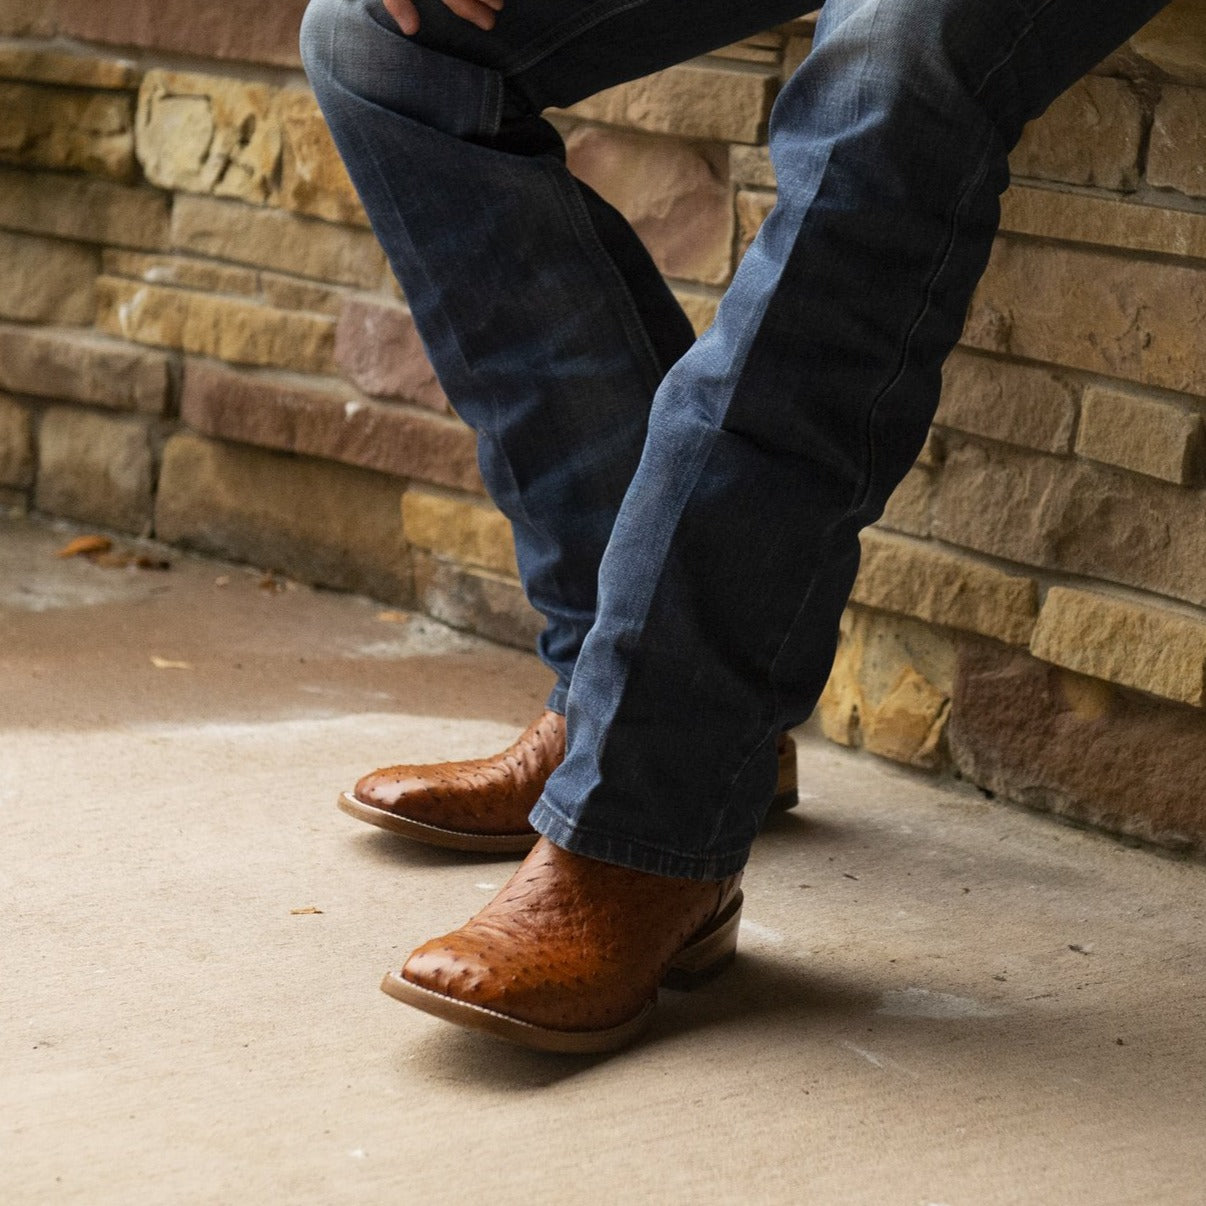 LaGrange Full Quill Ostrich Boot - Capitan Boots